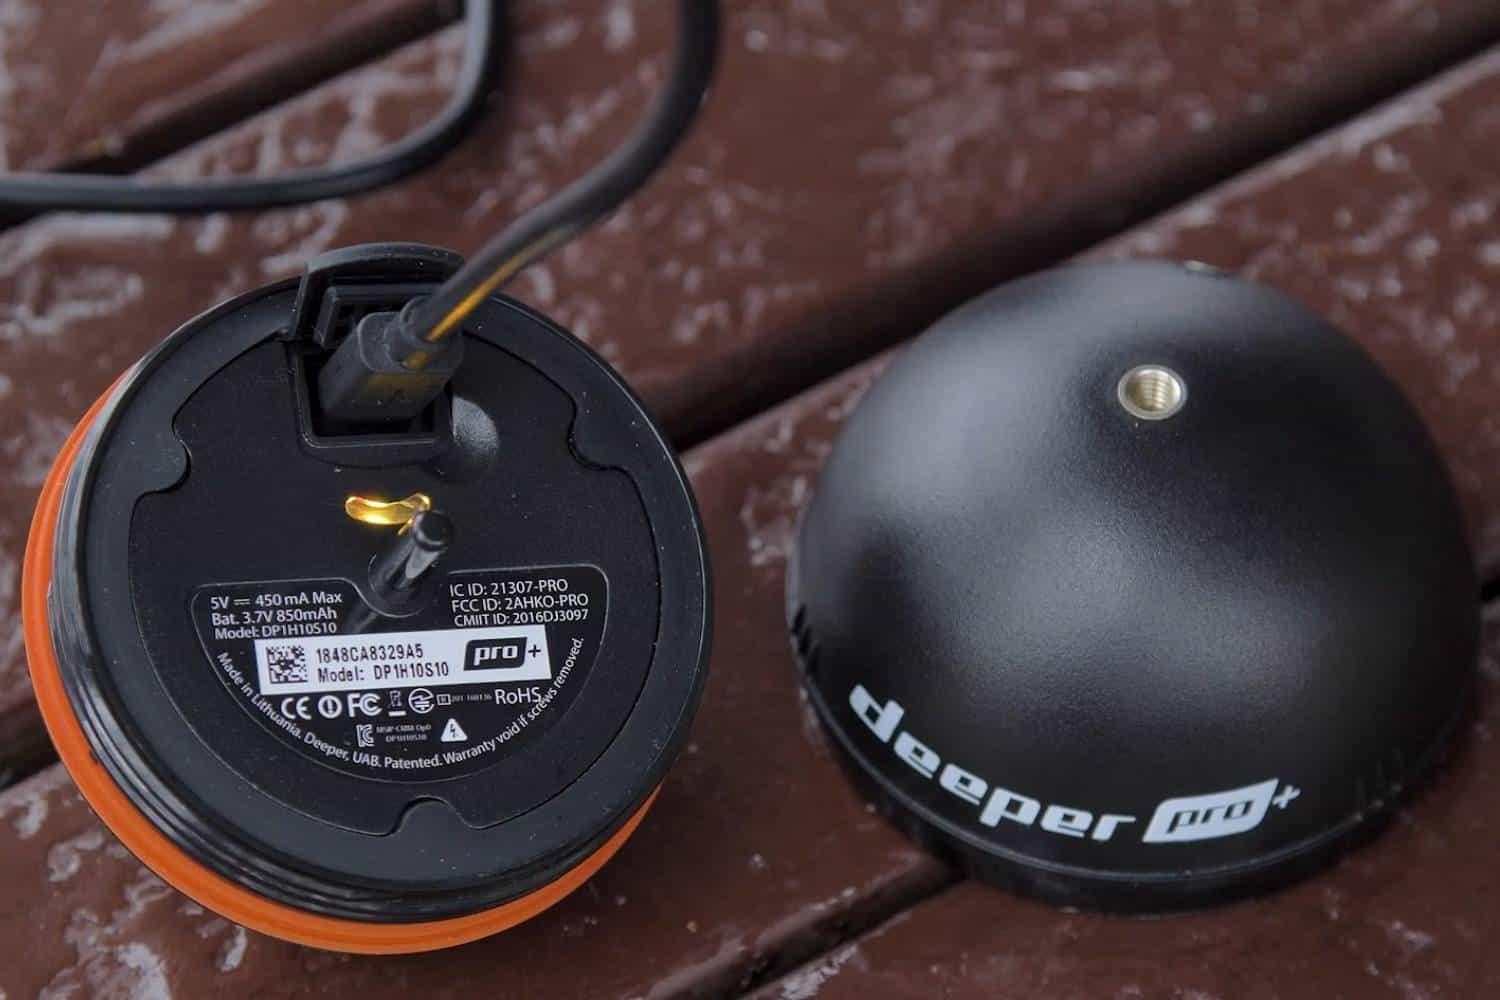 Things to Consider Before Buying the Deeper Smart Sonar Pro Plus